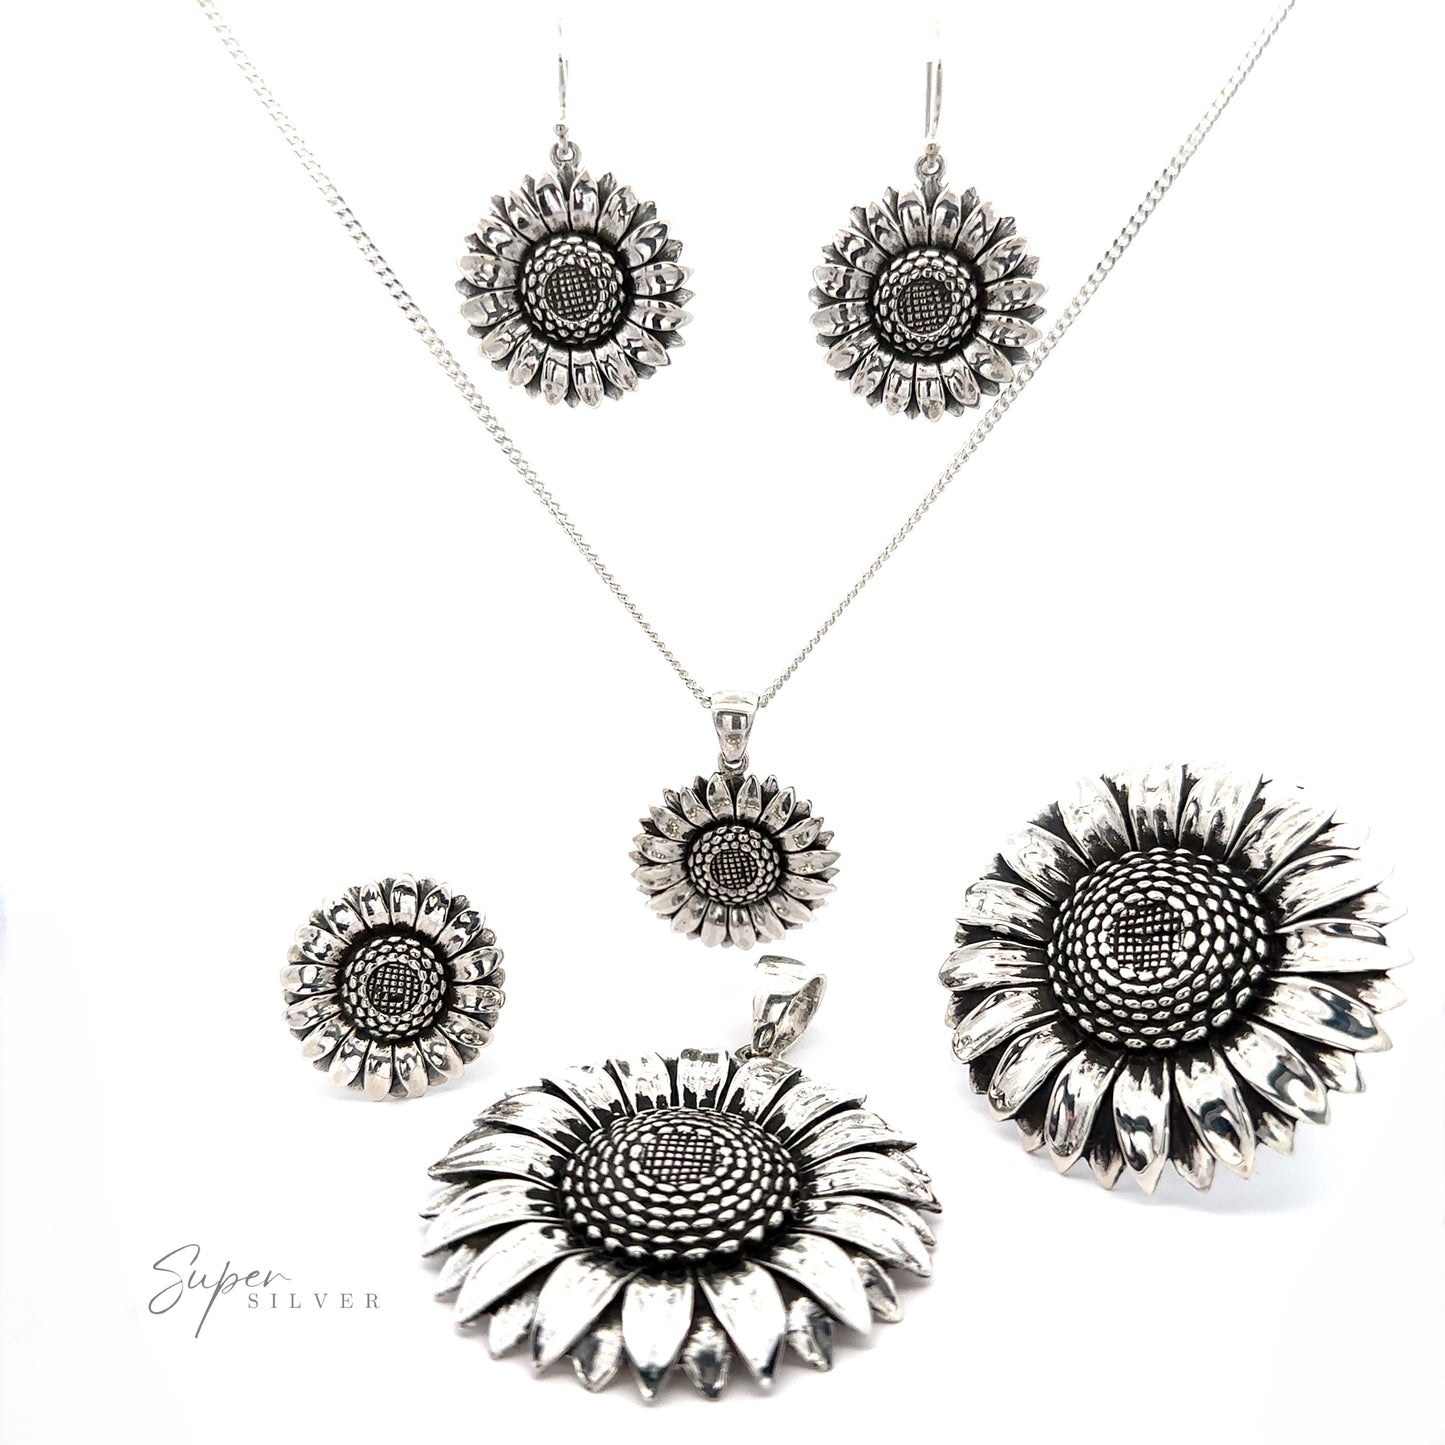 
                  
                    Silver sunflower pendant set with an oxidized finish, including earrings, necklaces, and brooches displayed on a white background.
                  
                